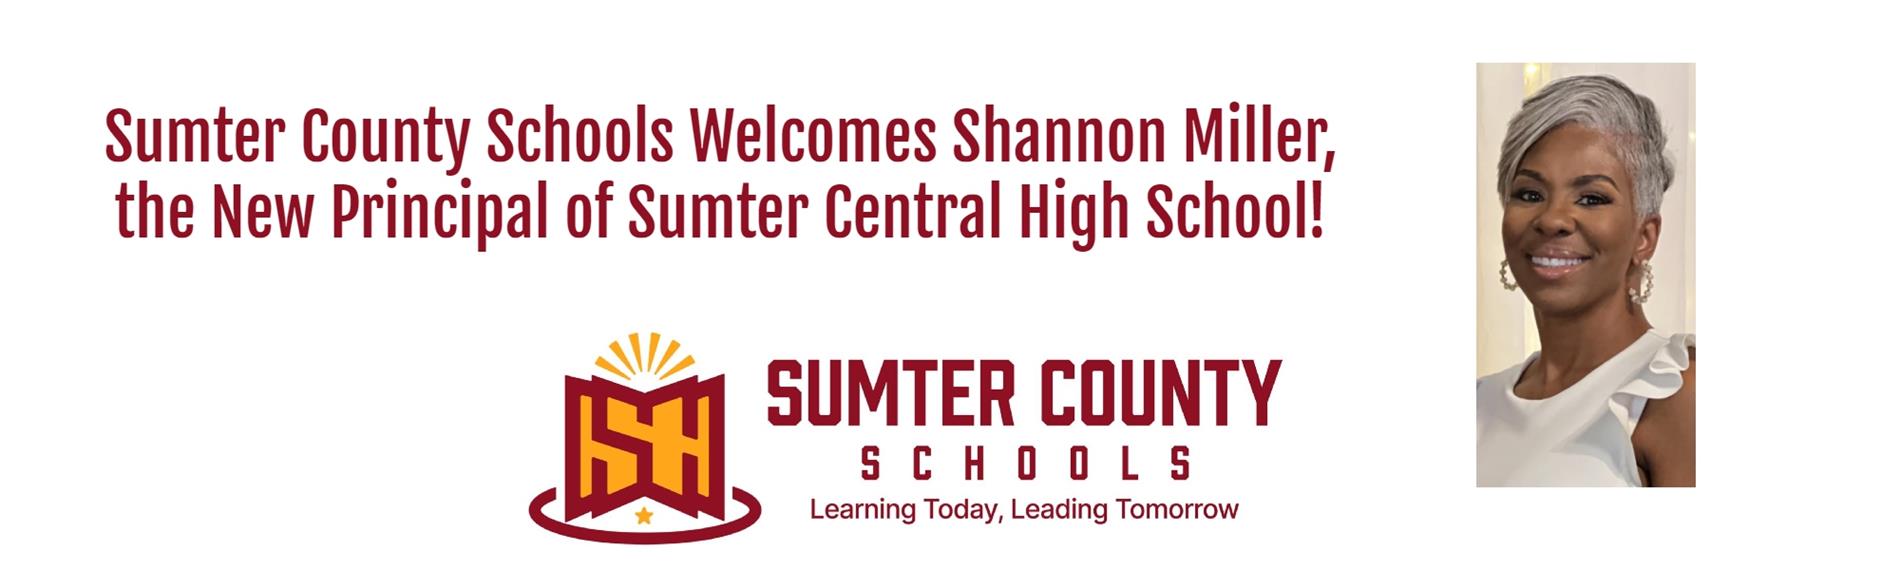 Sumter County Schools Welcomes Shannon Miller, the New Principal of Sumter Central High School!